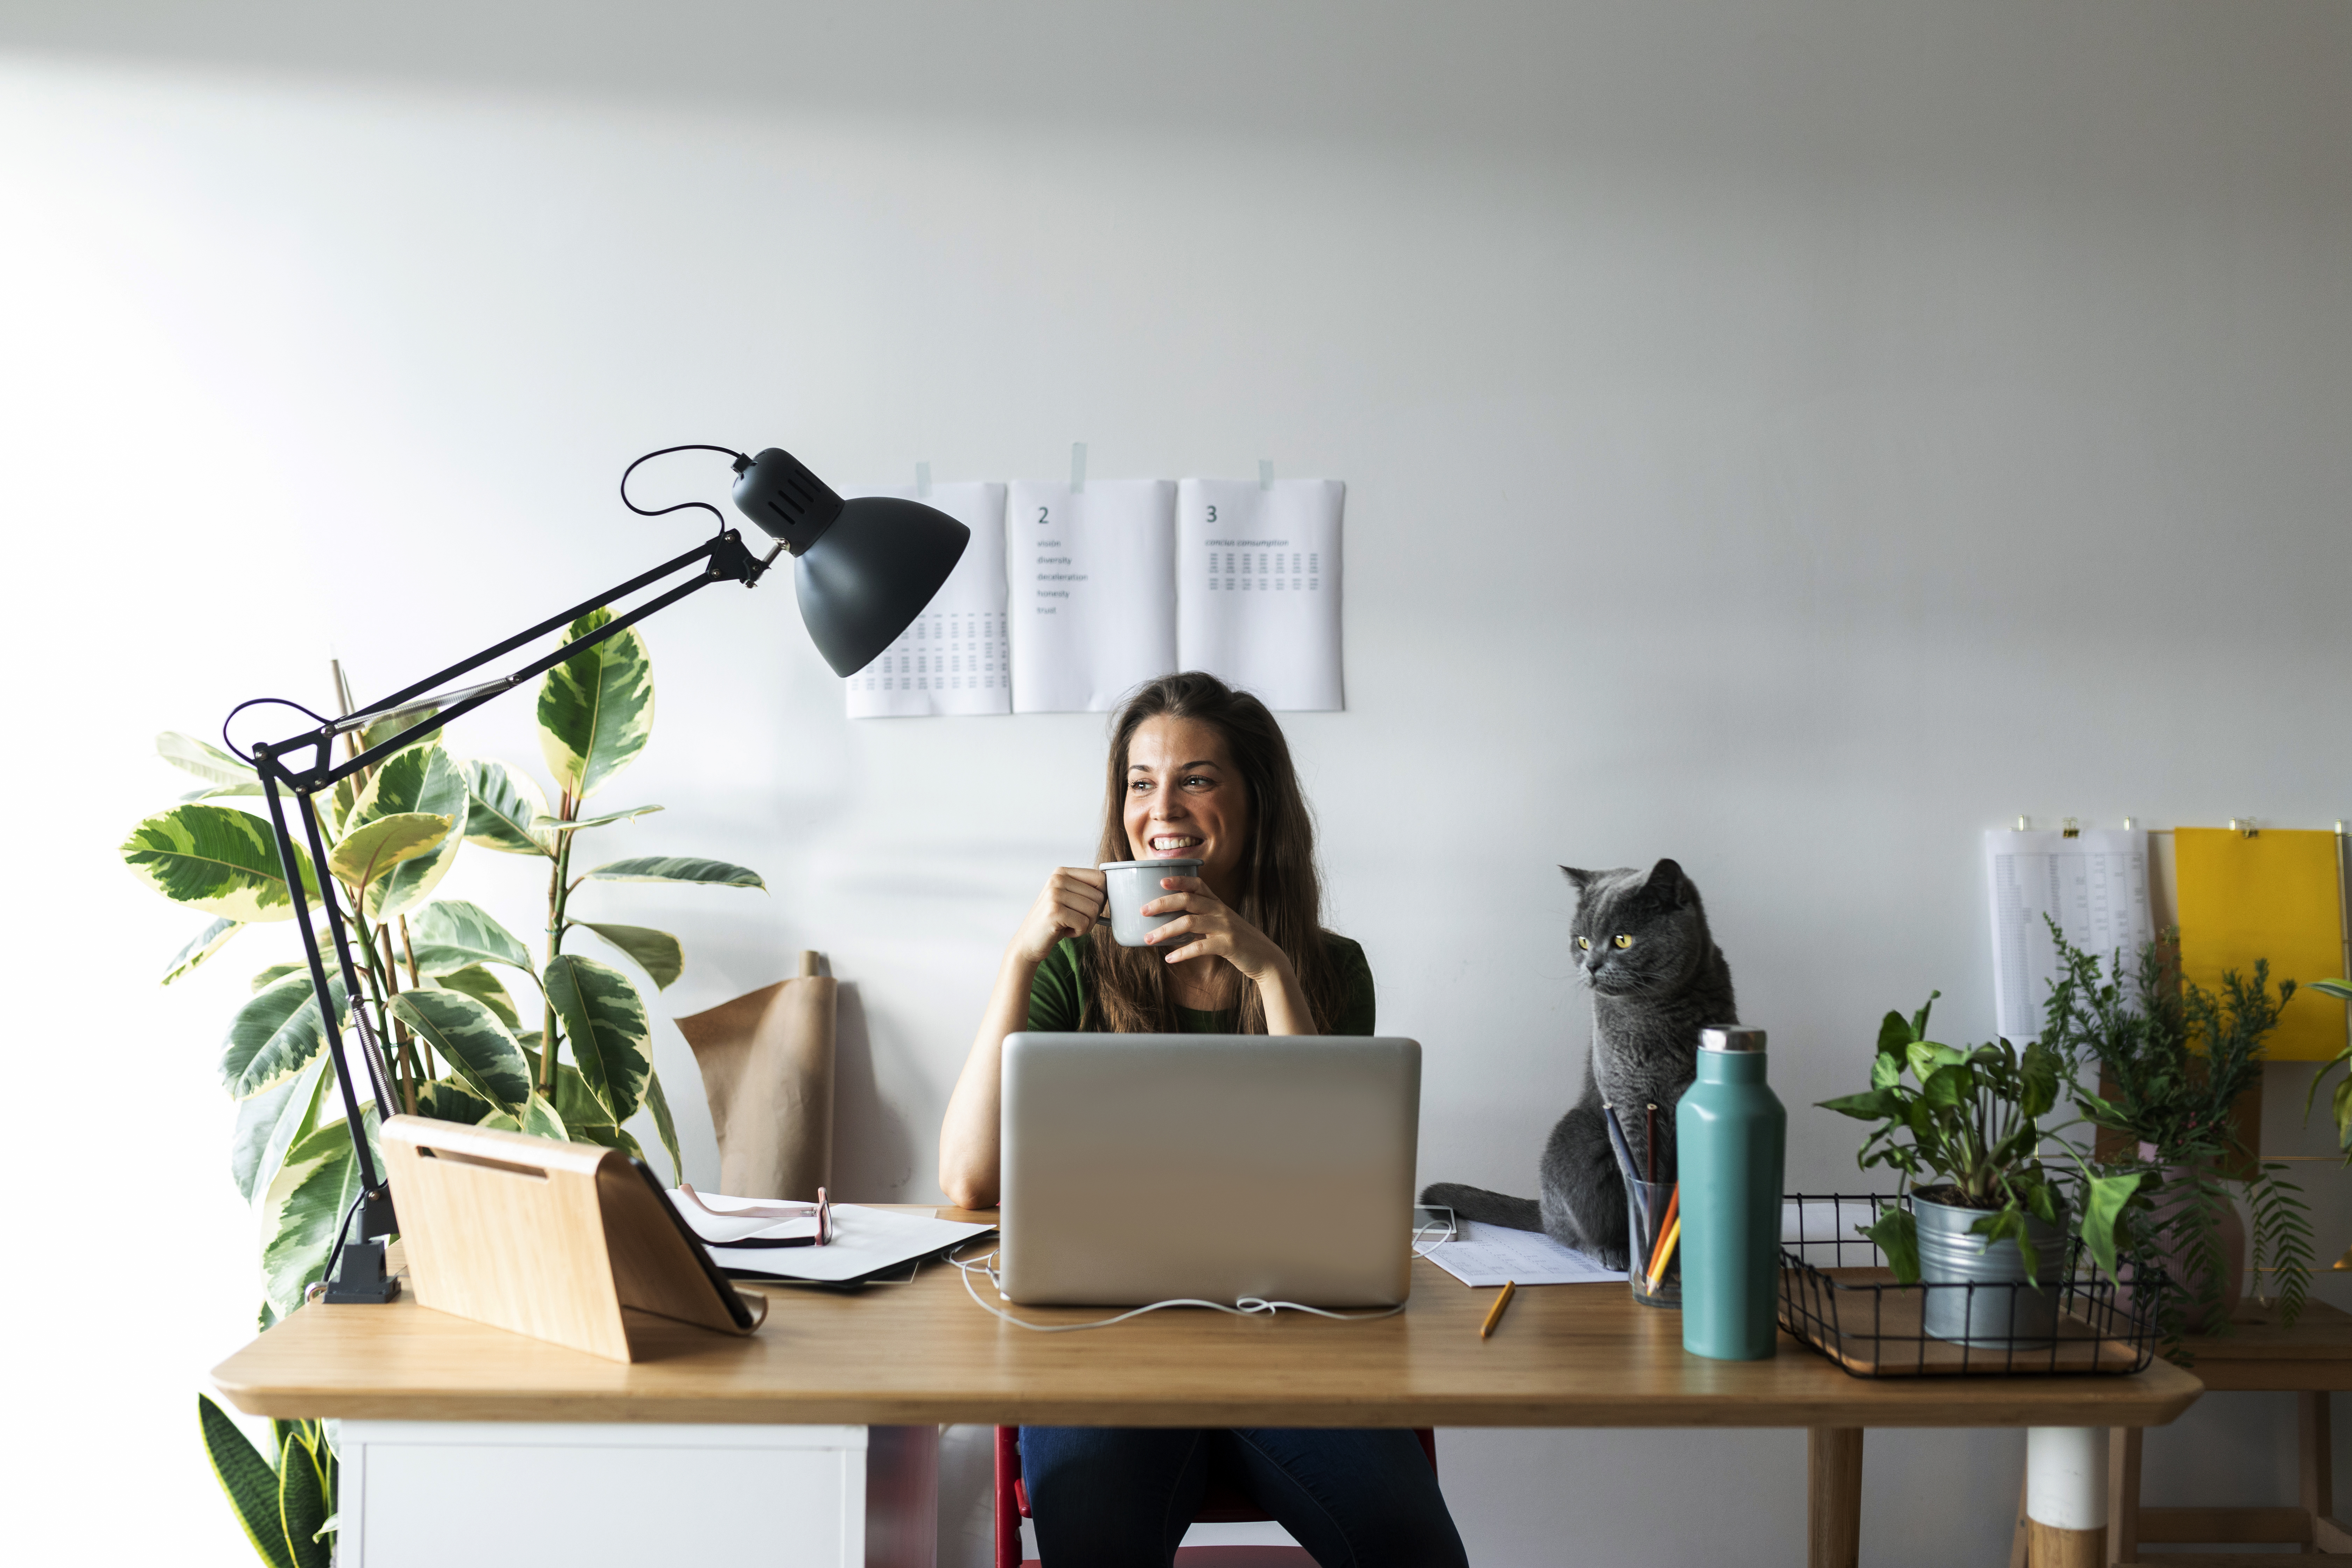 Working from home office lighting solutions